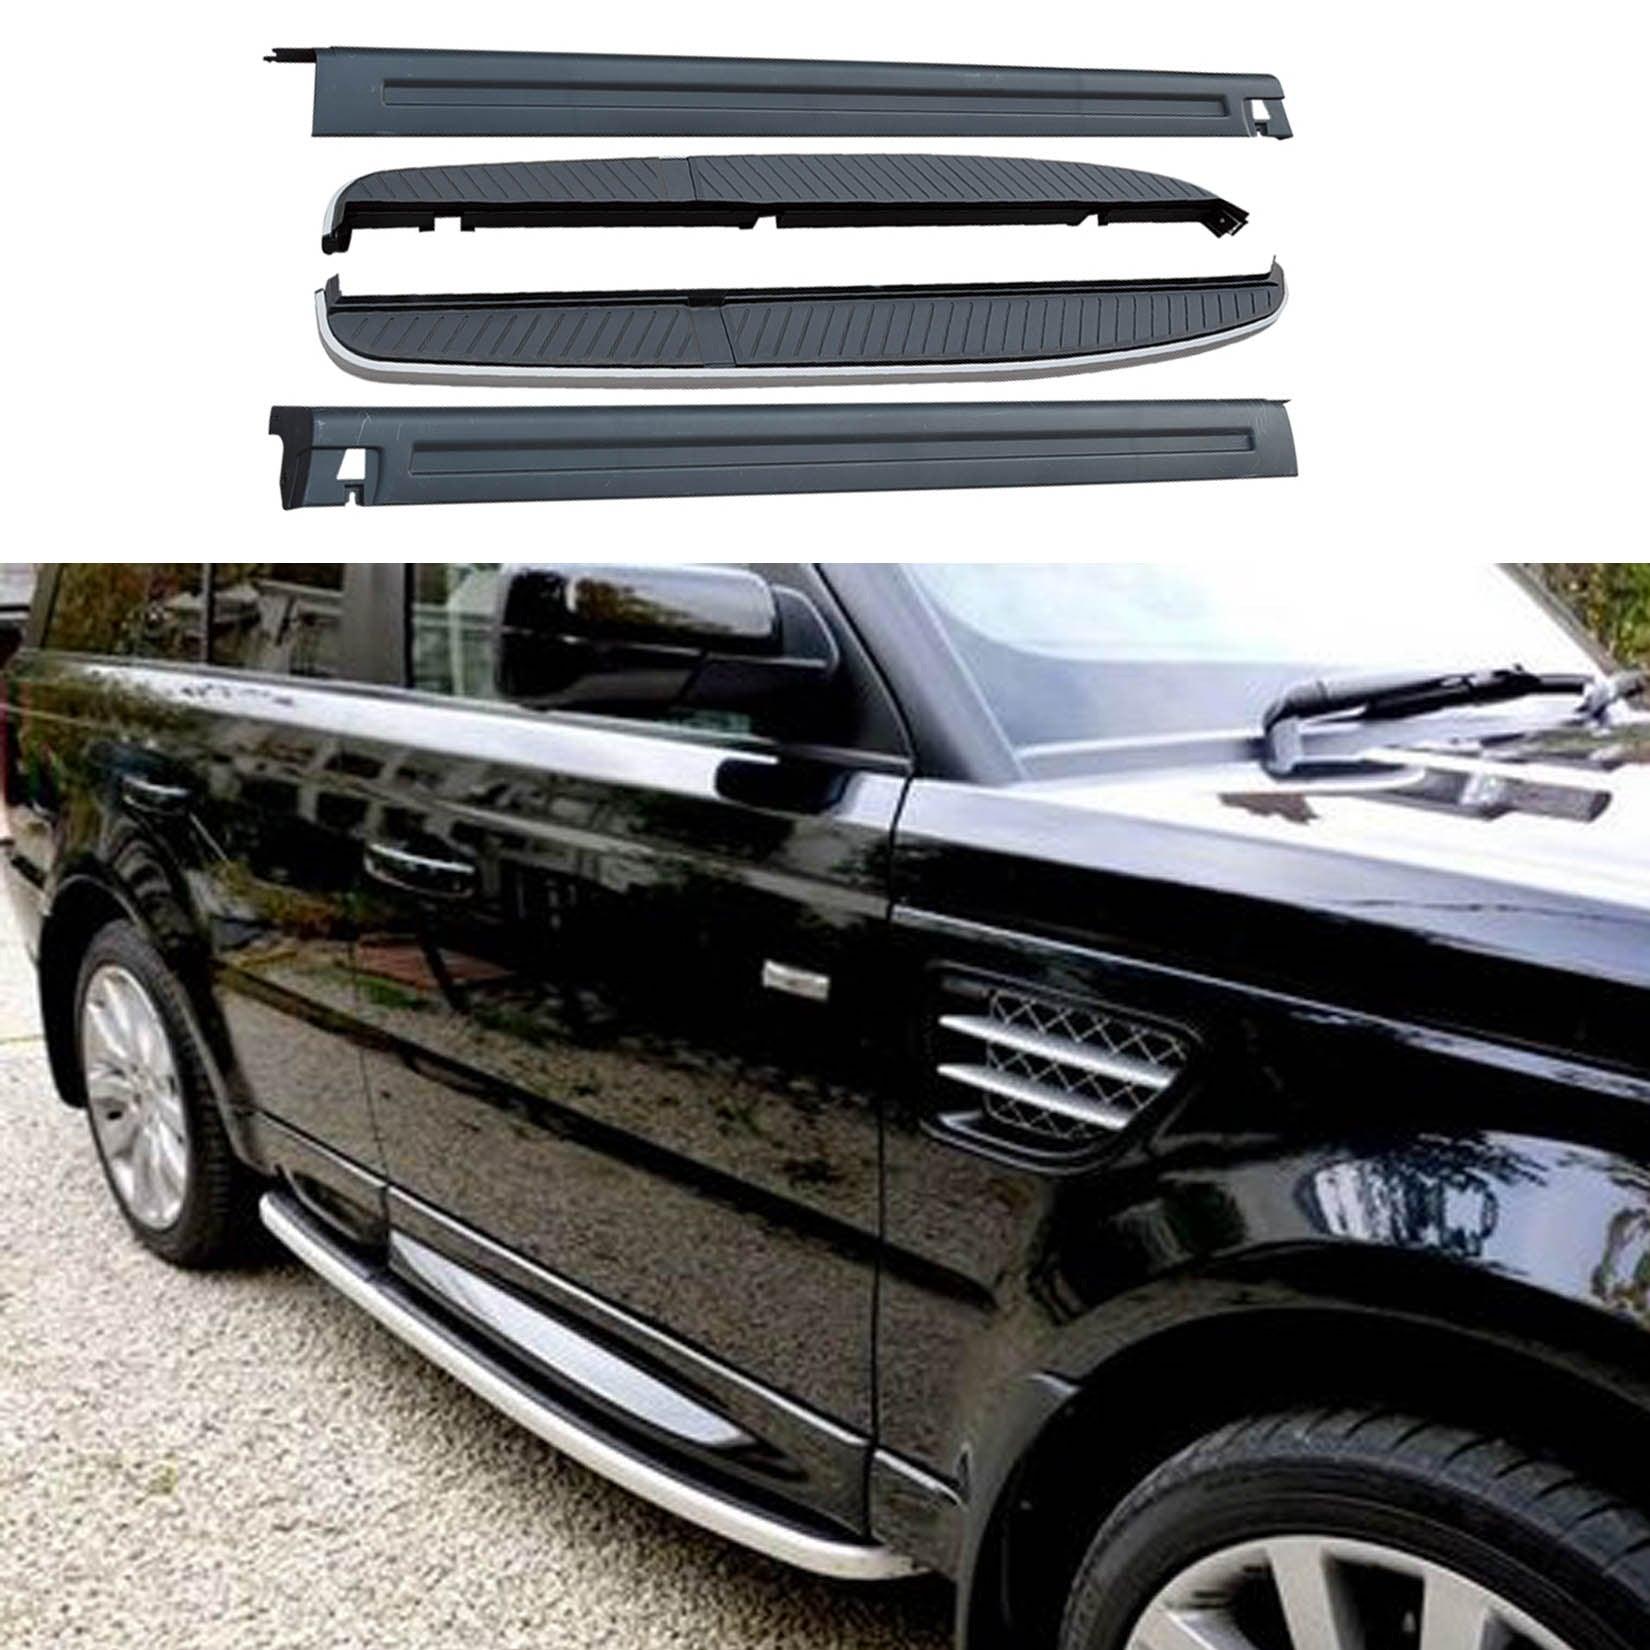 RANGE ROVER SPORT 2006-2013 - L322 - OEM STYLE RUNNING BOARDS SIDE STEP- PAIR - Storm Xccessories2